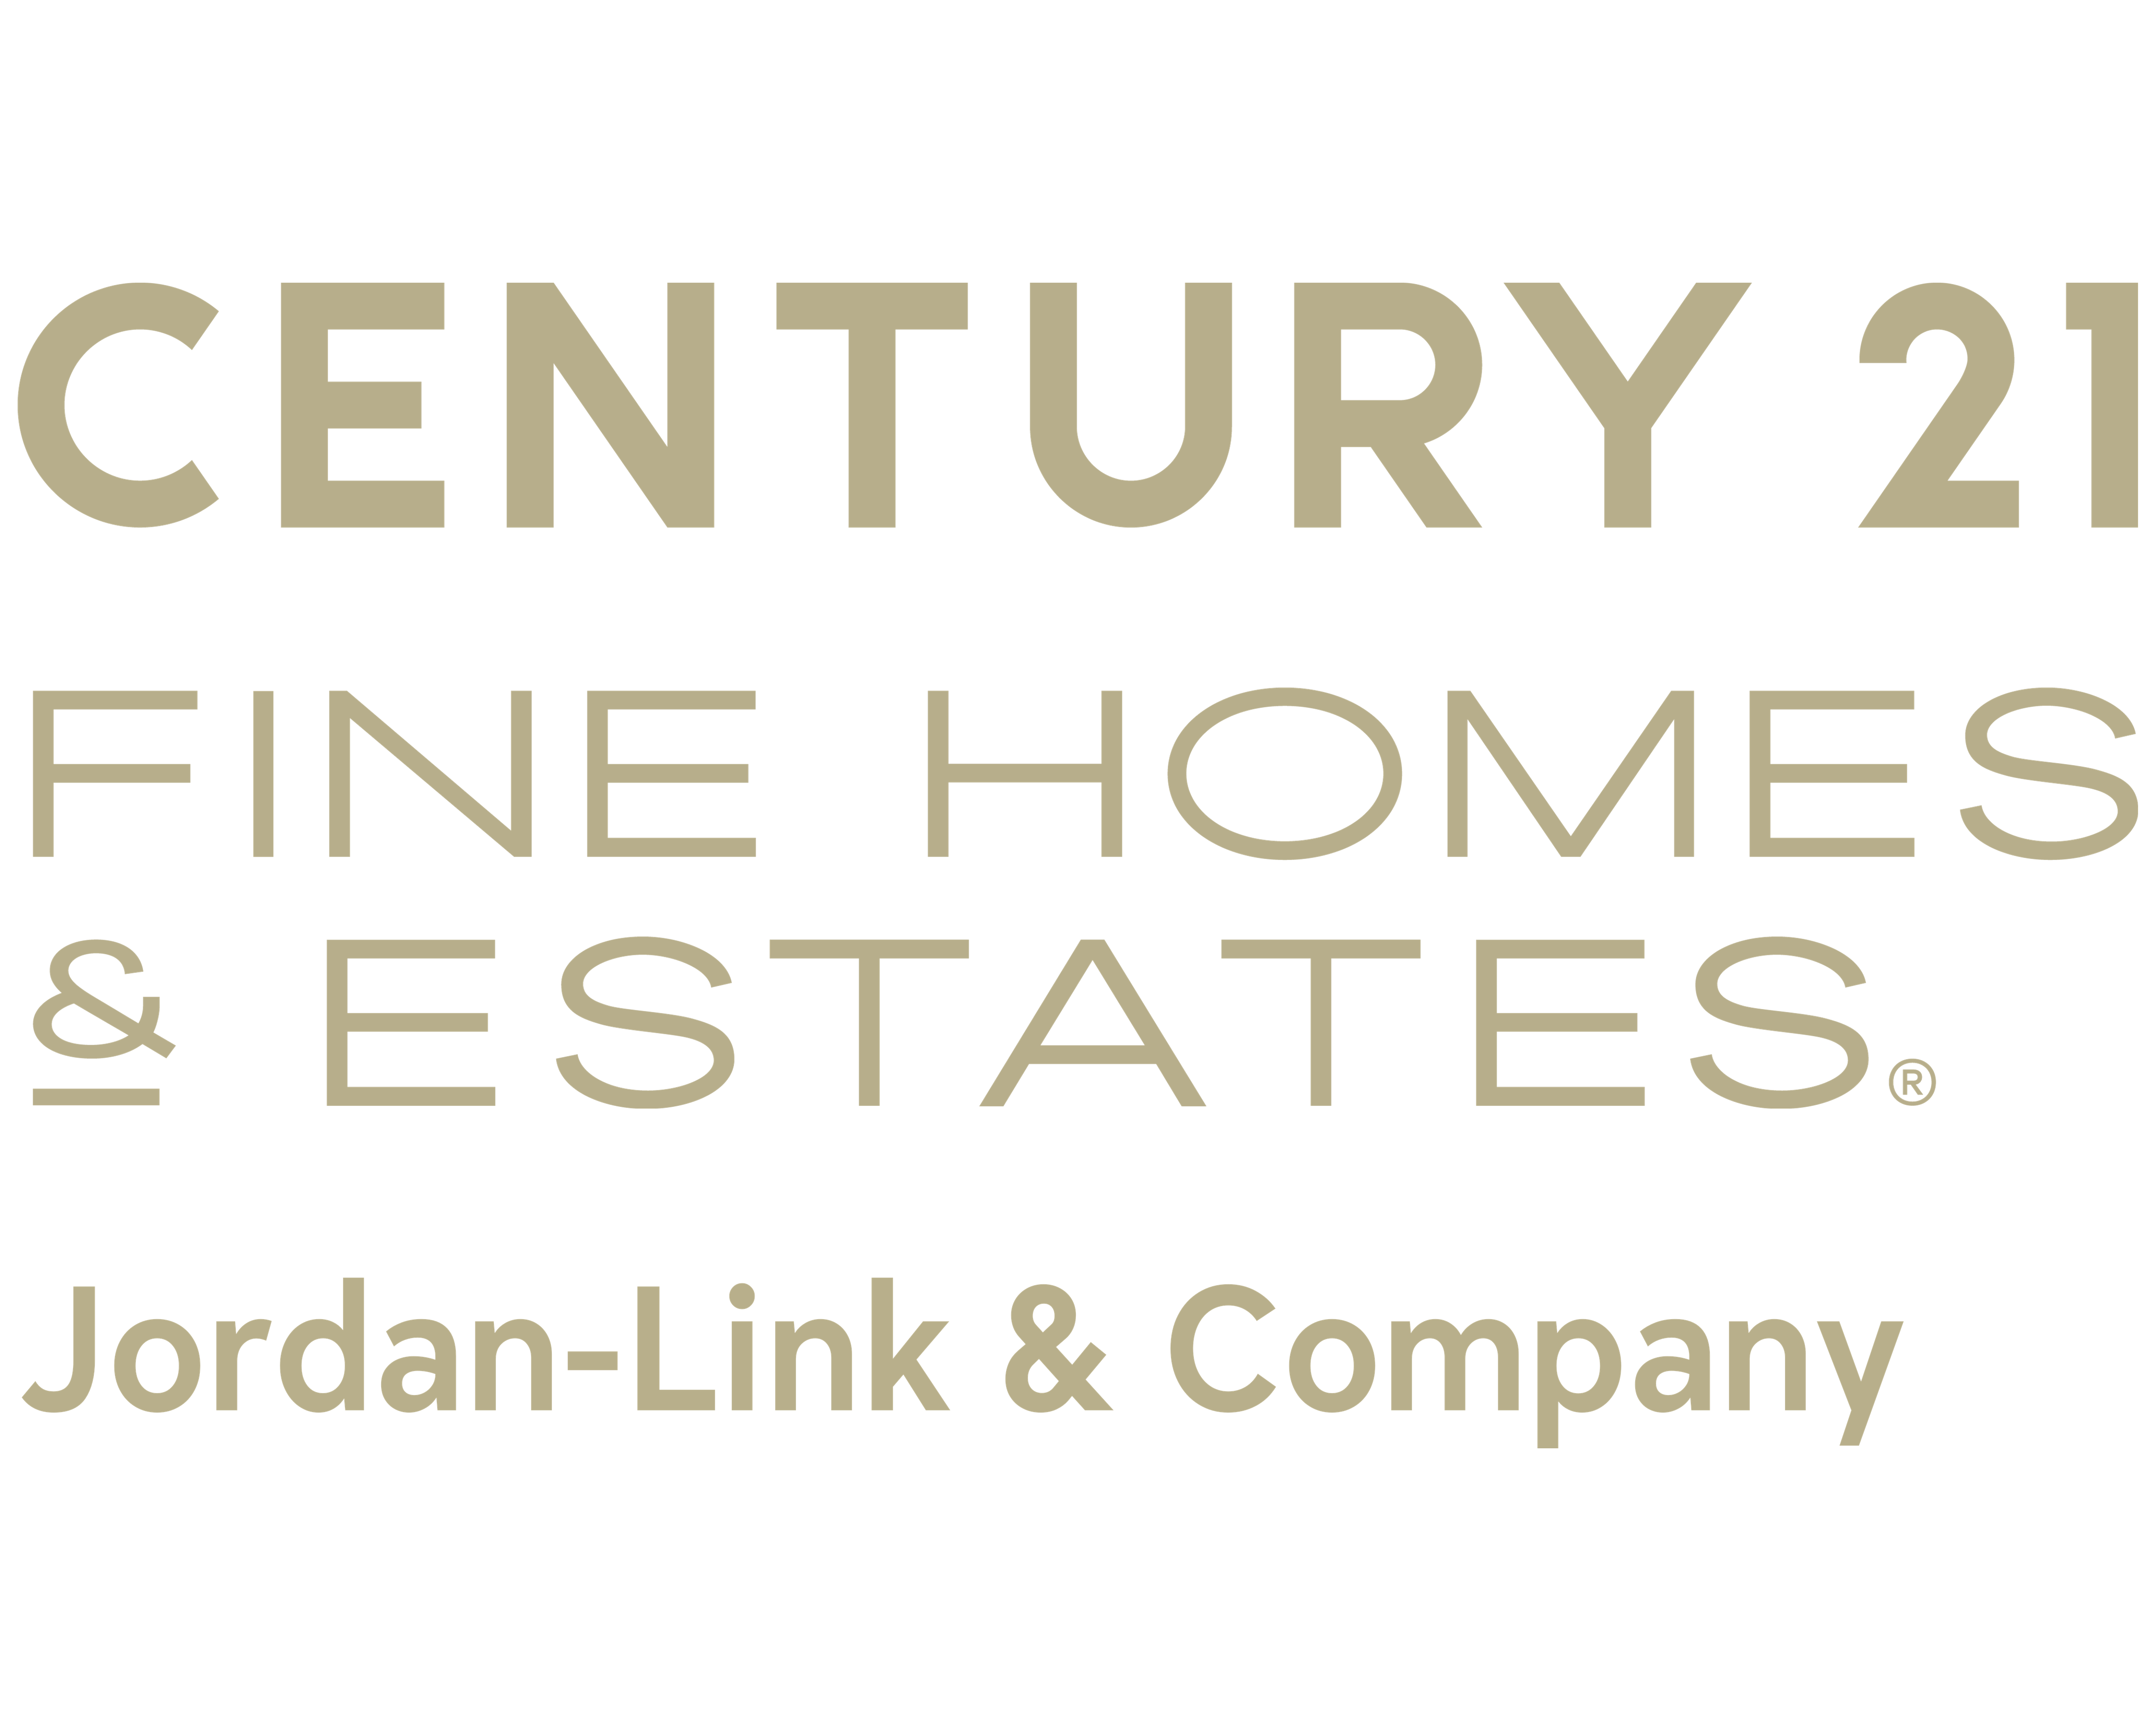 CENTURY 21 Fine Homes & Estates logo featuring the brand name in bold black letters with the subtext 'Jordan-Link & Company' below it